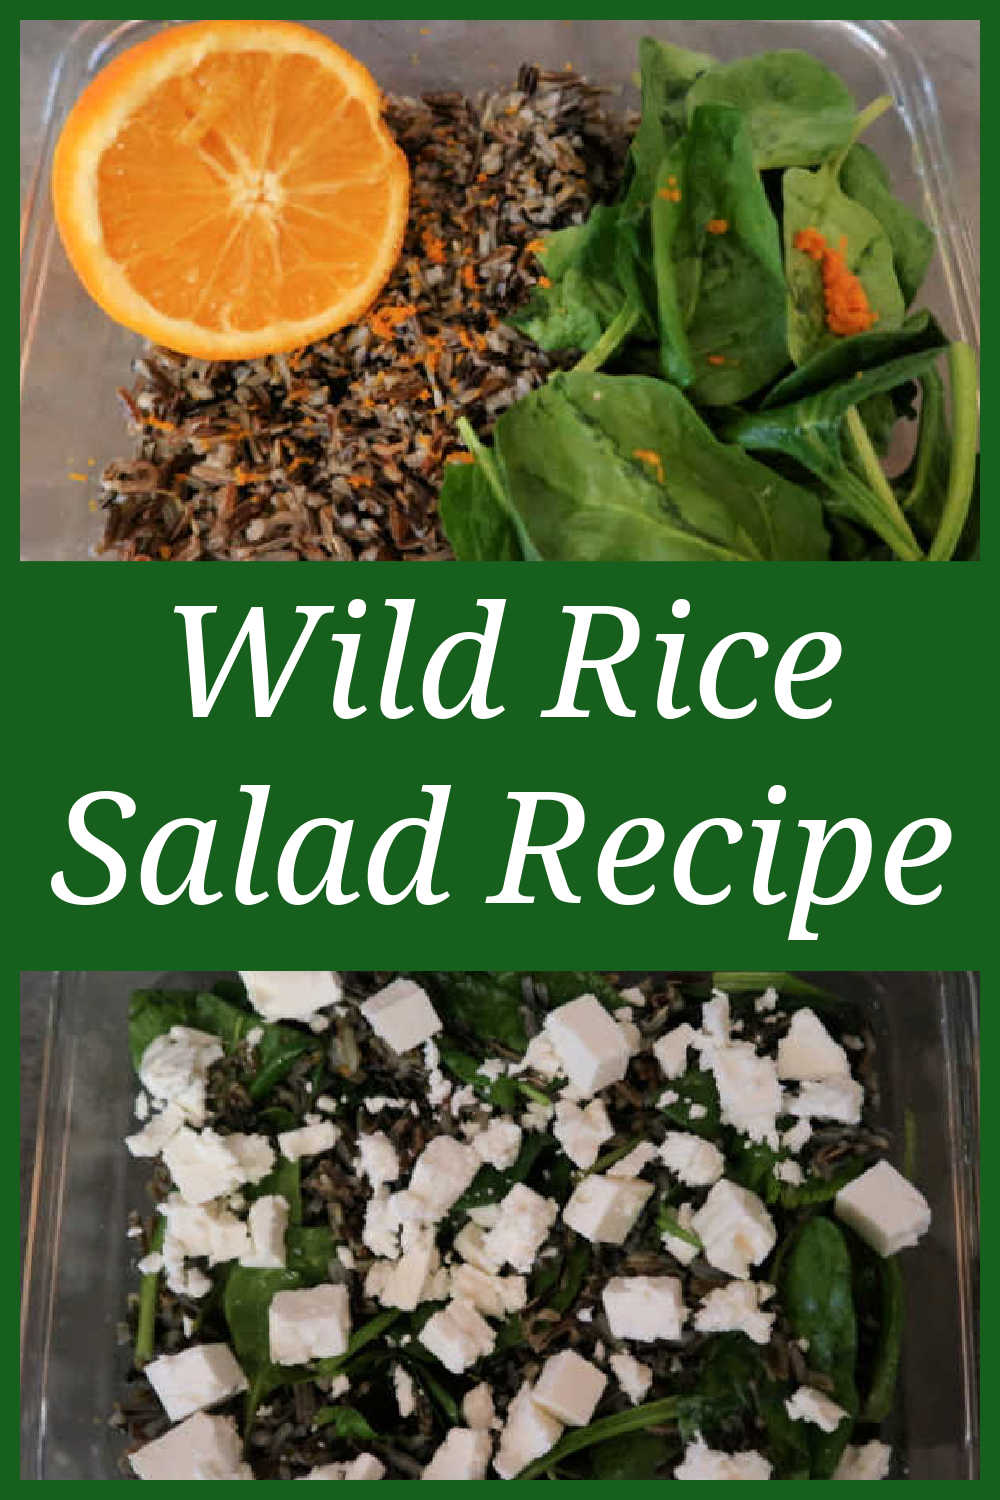 Wild Rice Salad Recipe - how to make the best easy and healthy wild rice salad with orange and feta cheese - with the video tutorial.